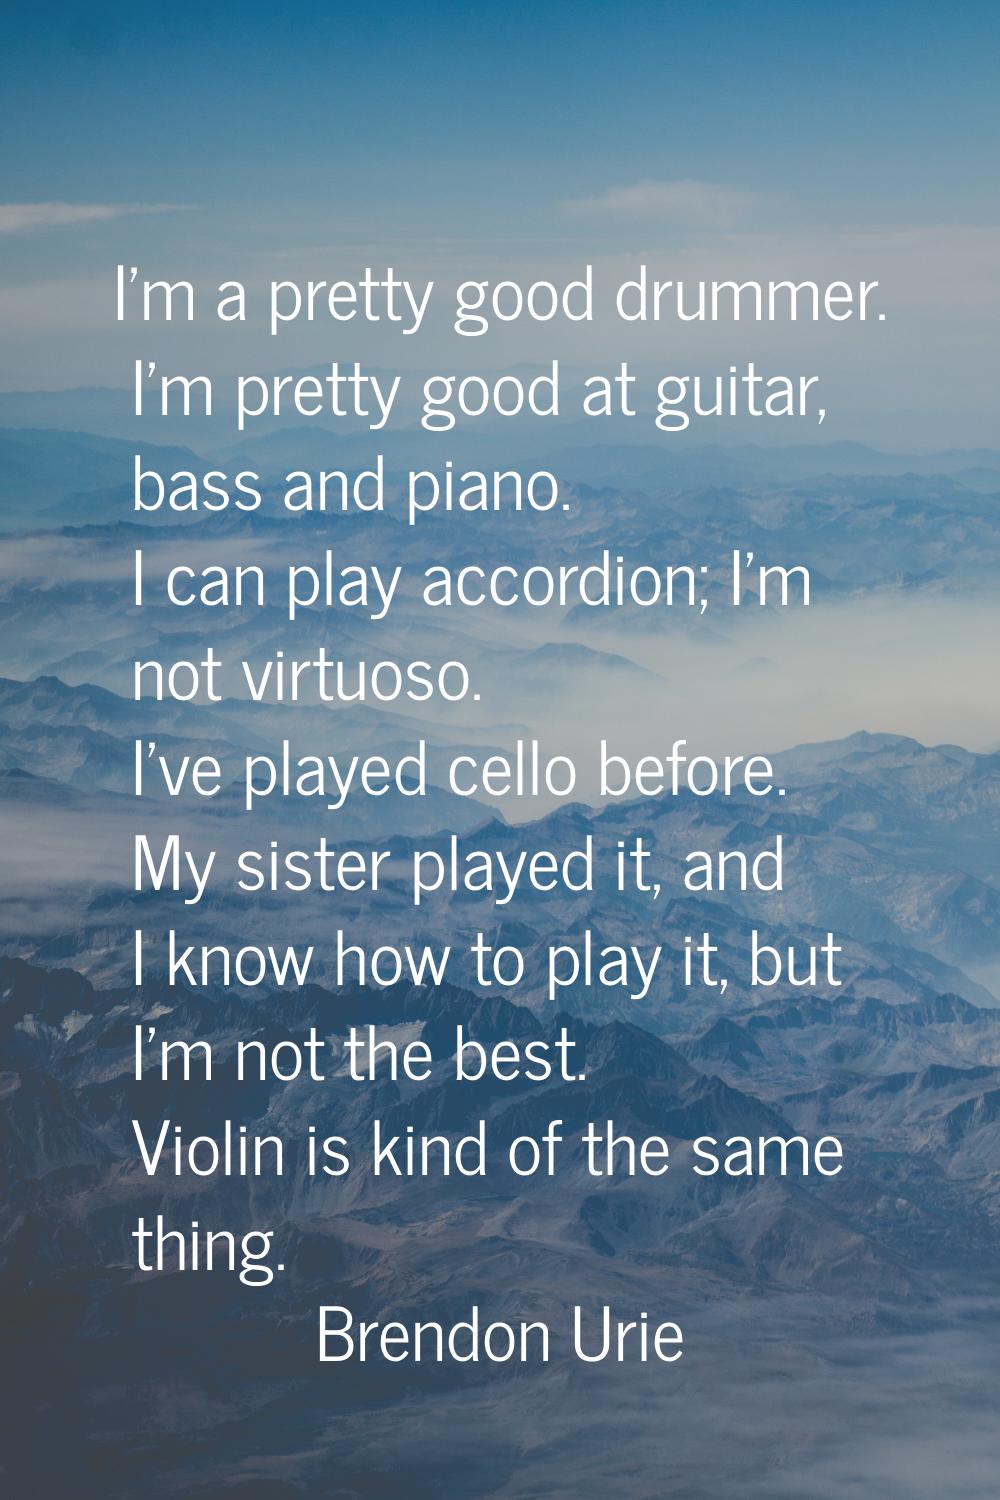 I'm a pretty good drummer. I'm pretty good at guitar, bass and piano. I can play accordion; I'm not